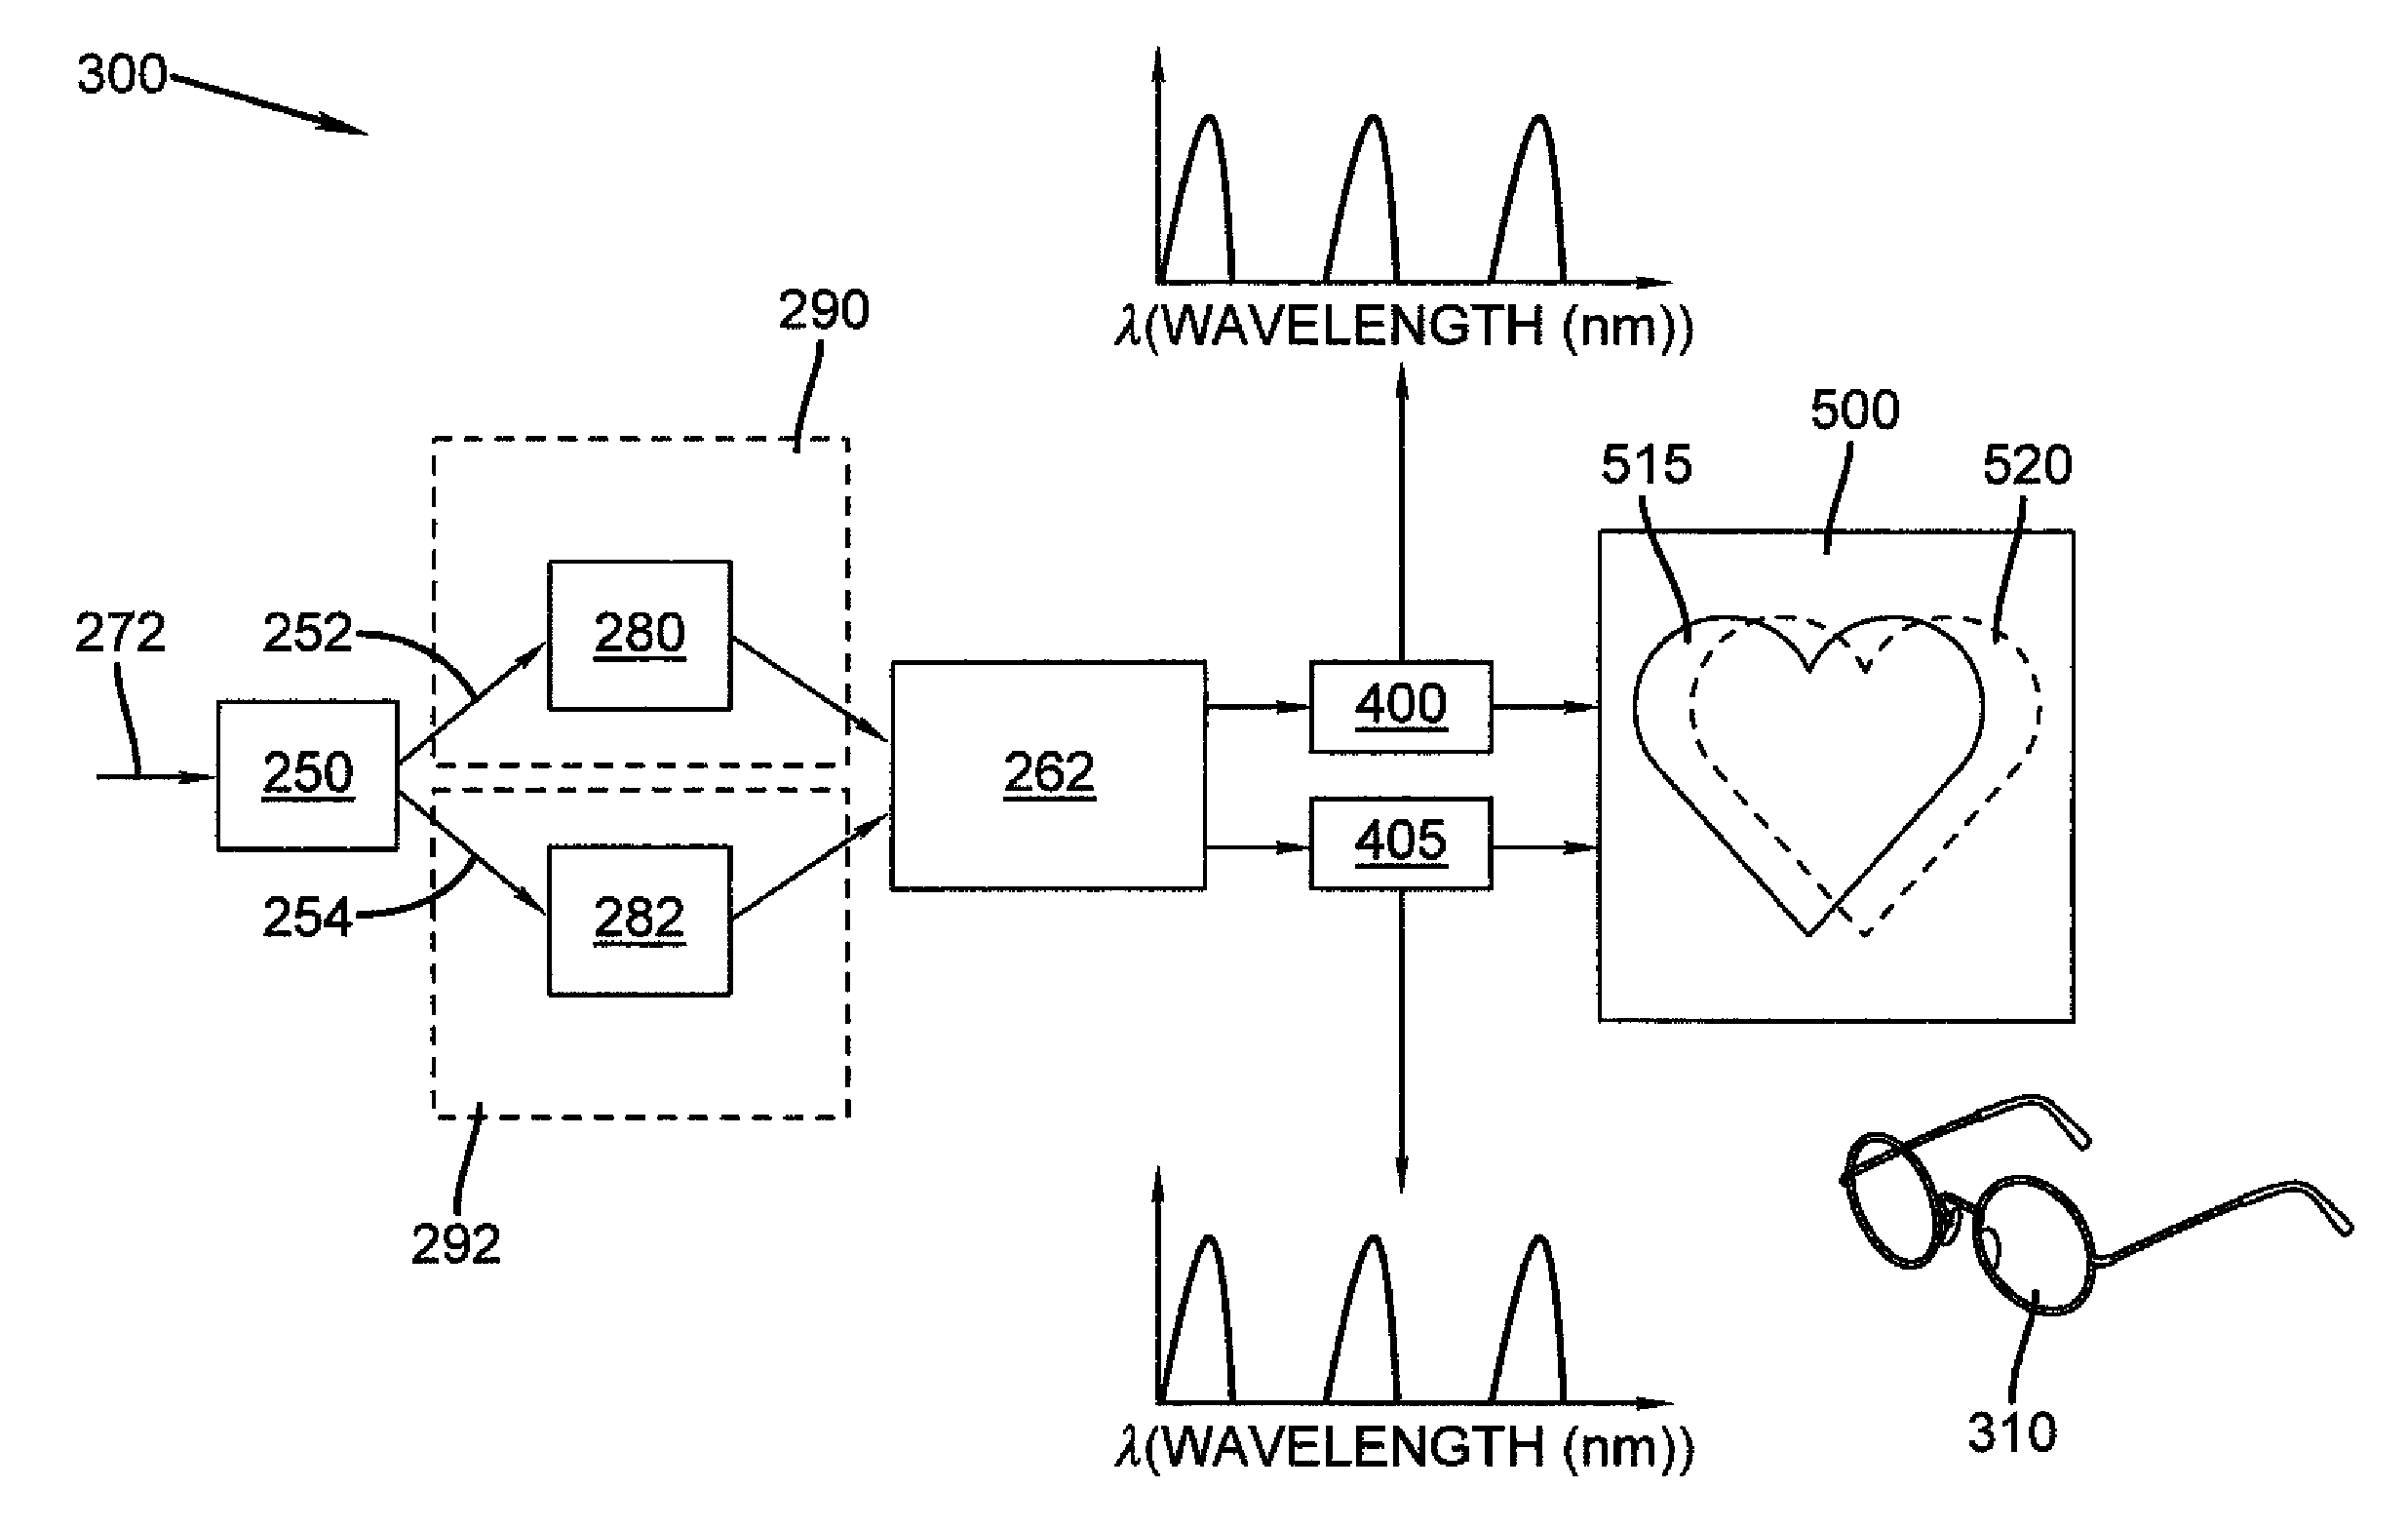 2D/3D switchable color display apparatus with narrow band emitters